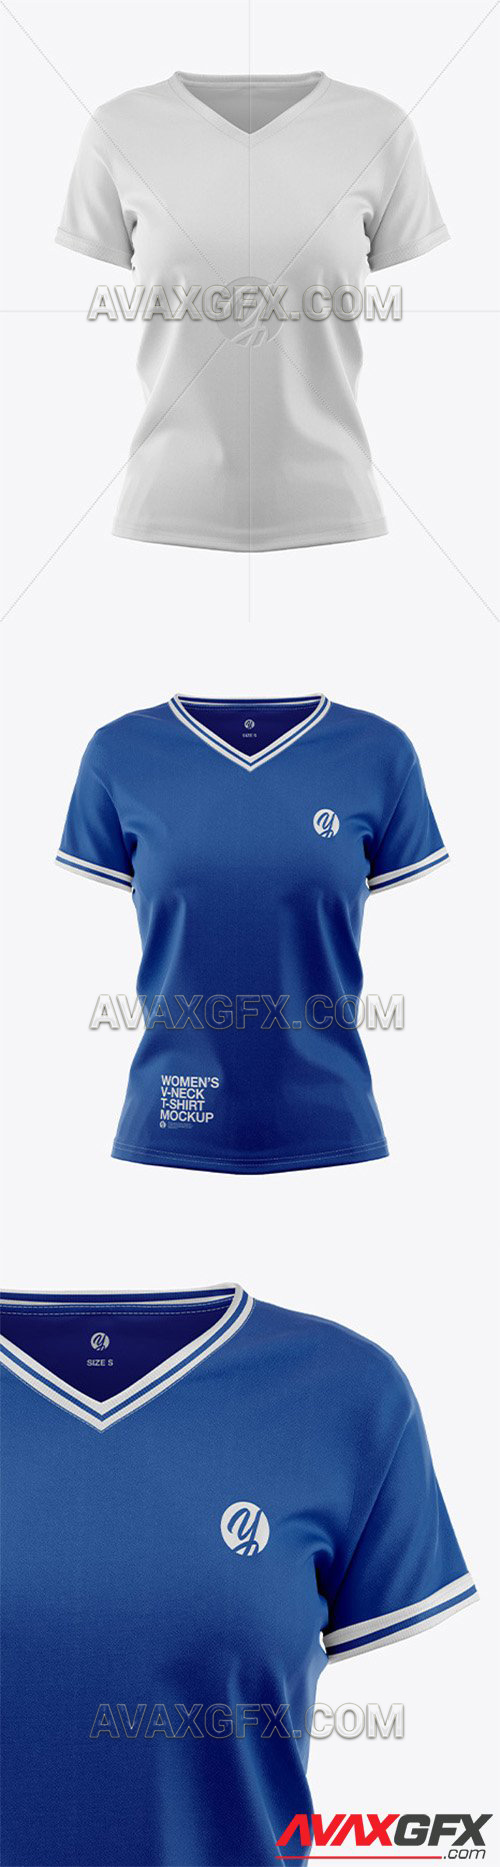 Download Women's V-Neck T-Shirt Mockup Front View 60388 » AVAXGFX ...